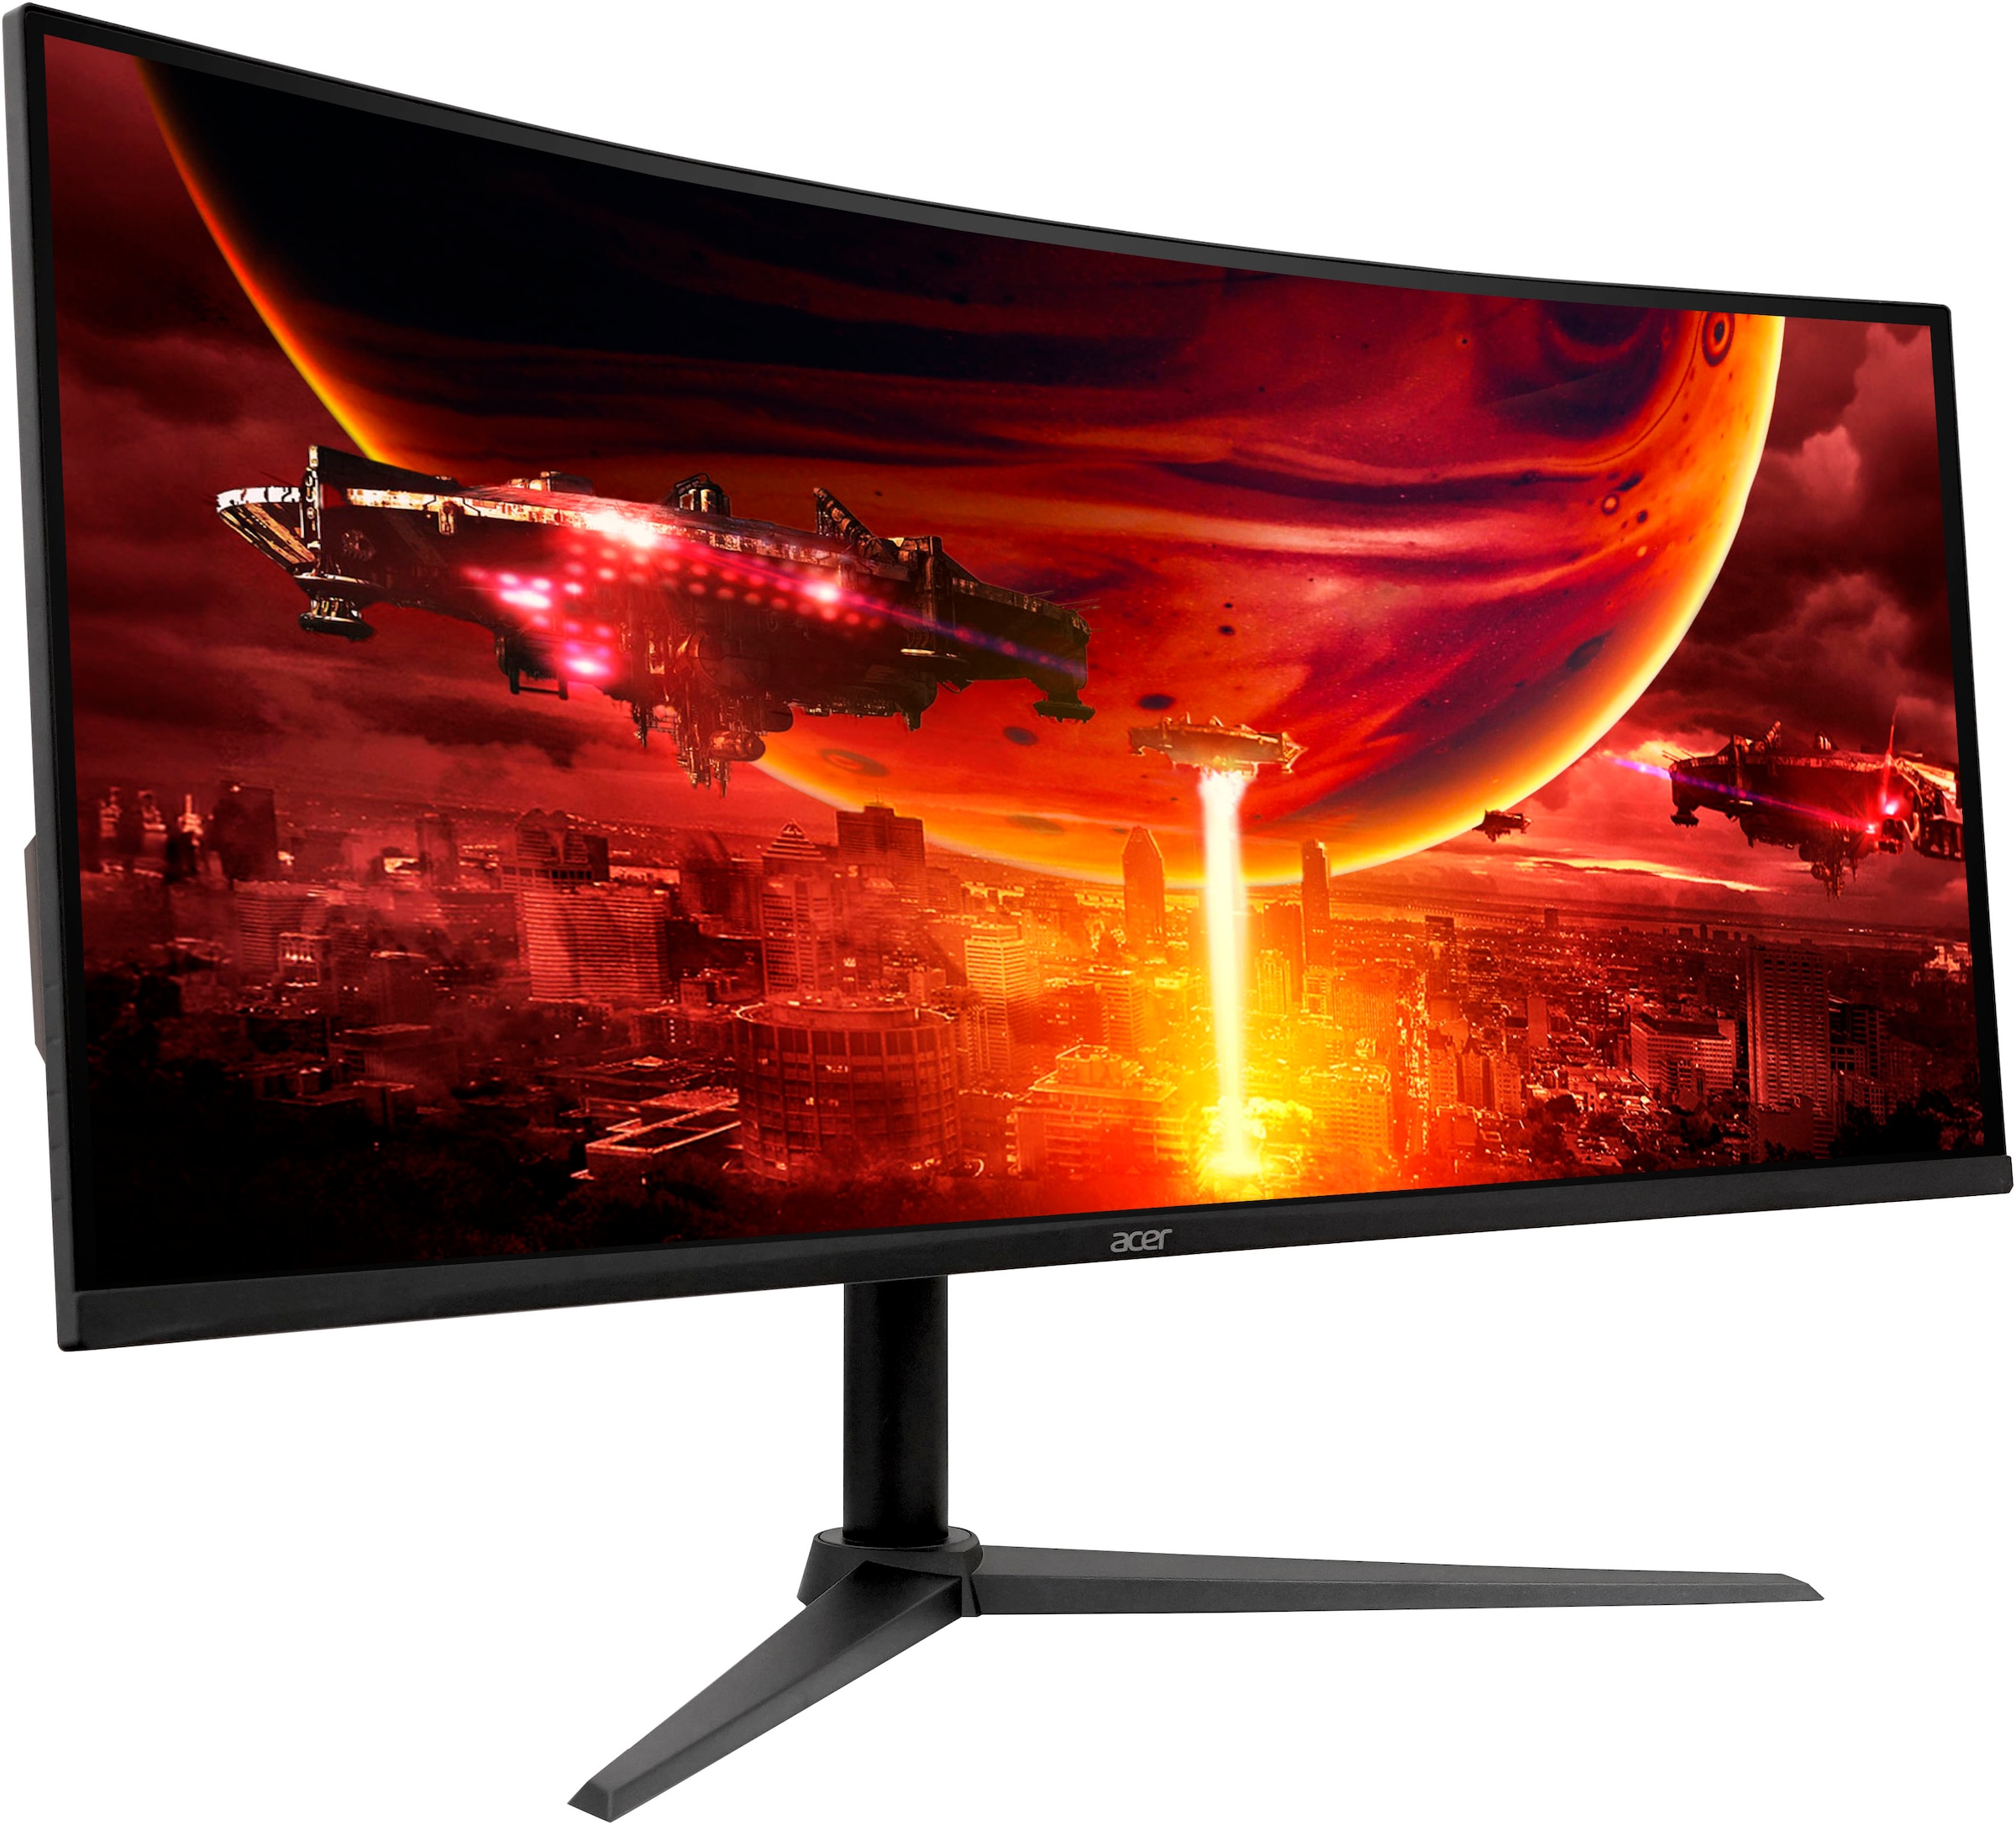 Acer Curved-Gaming-Monitor »ED340CU S«, 87 cm/34 Zoll, 3440 x 1440 px, UWQHD, 1 ms Reaktionszeit, 180 Hz